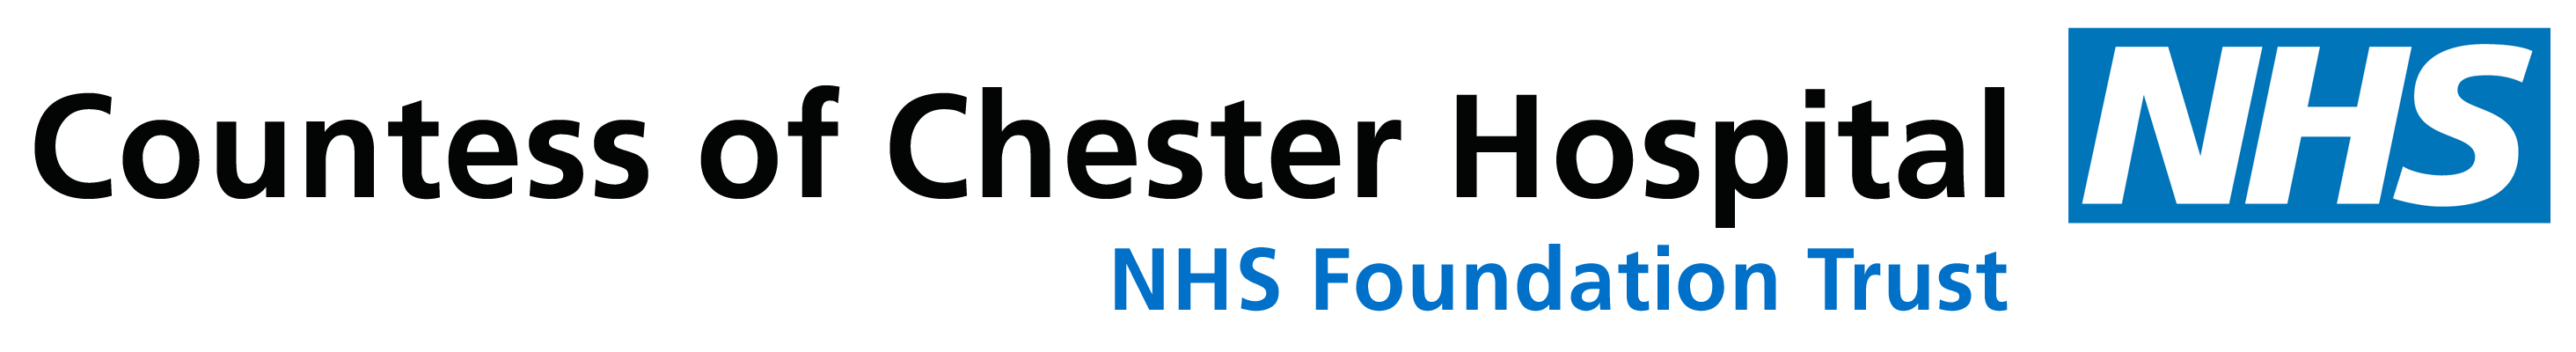 Countess of Chester Hospital NHS Foundation Trust Logo